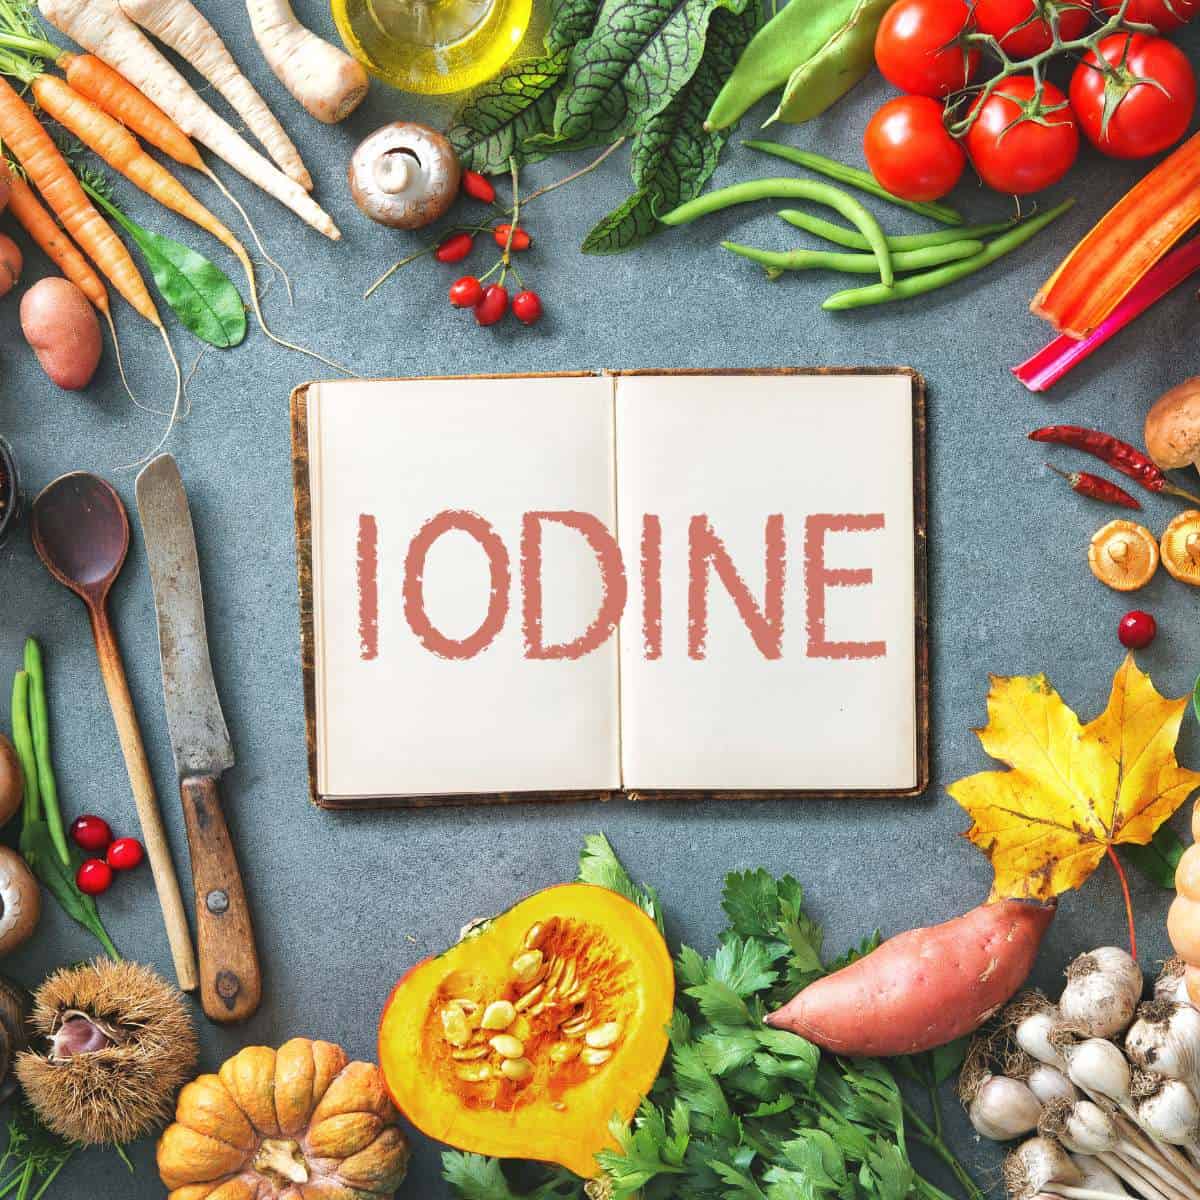 Vegan Iodine Sources: Are You Getting Enough of this Vital Nutrient?